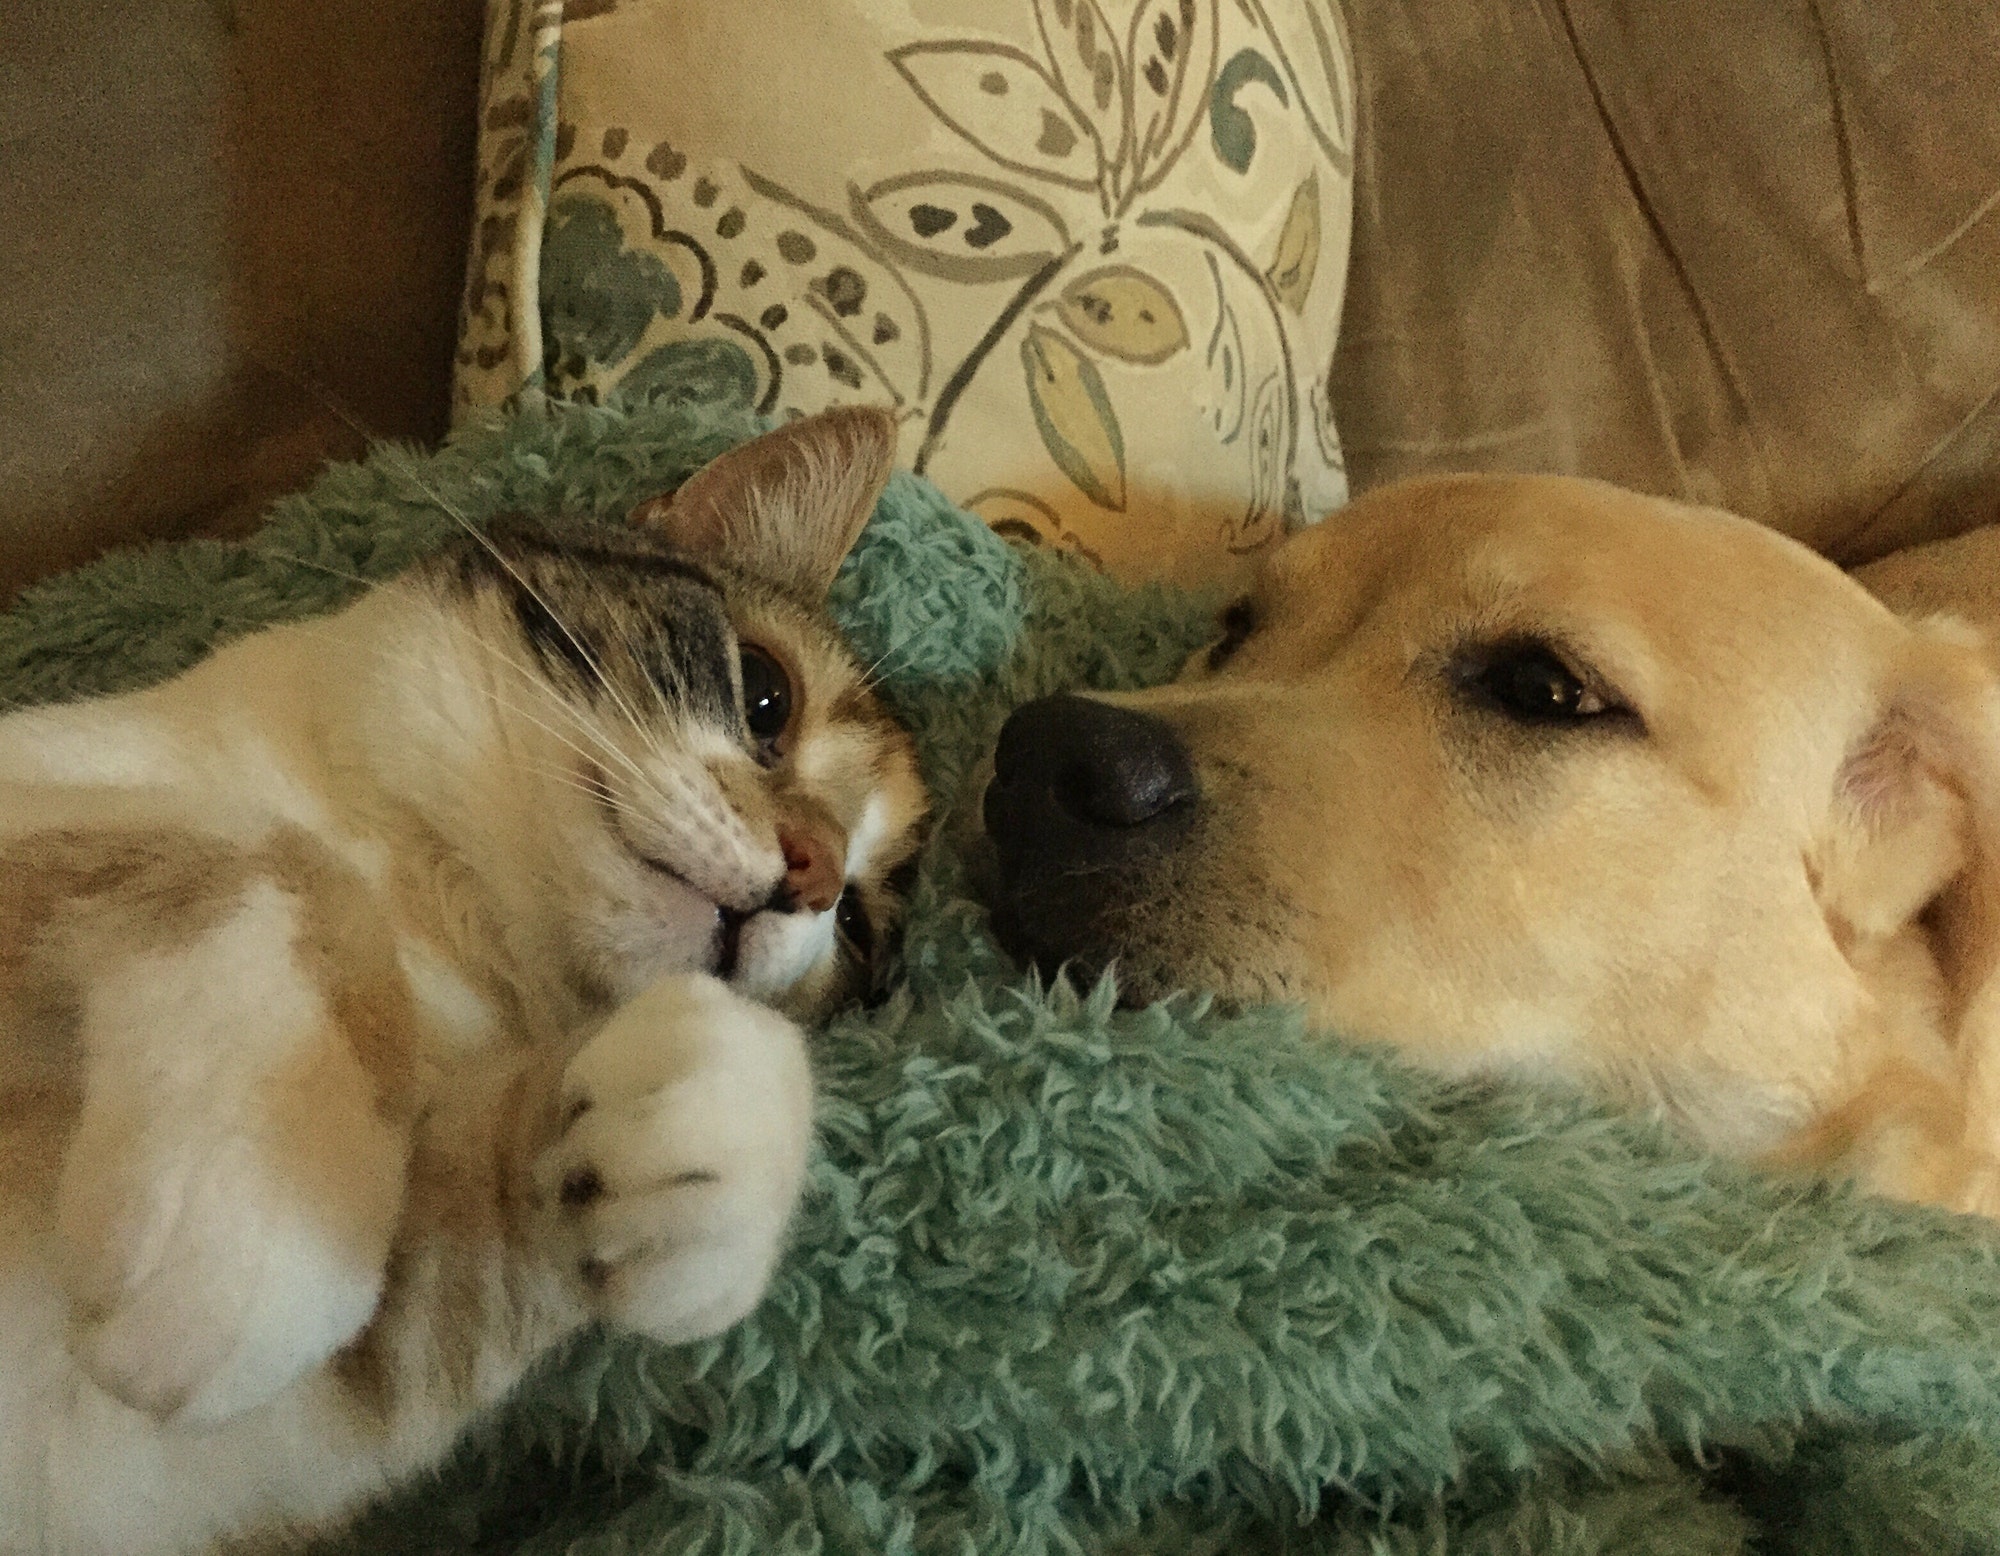 Dog and cat pals